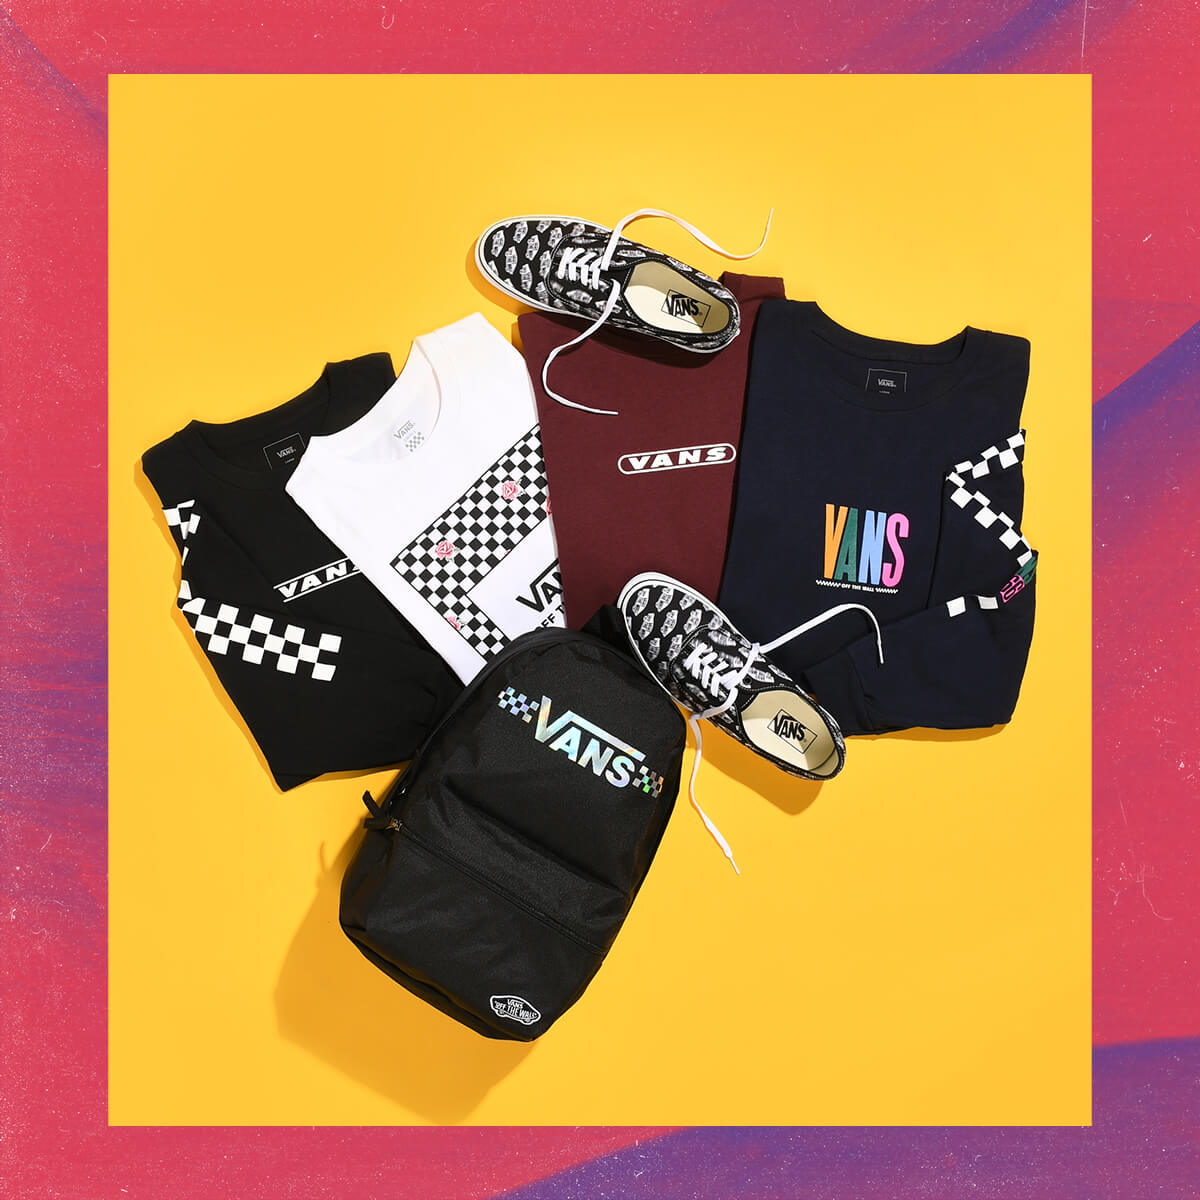 EVERYTHING VANS - GET THE RIGHT GIFT